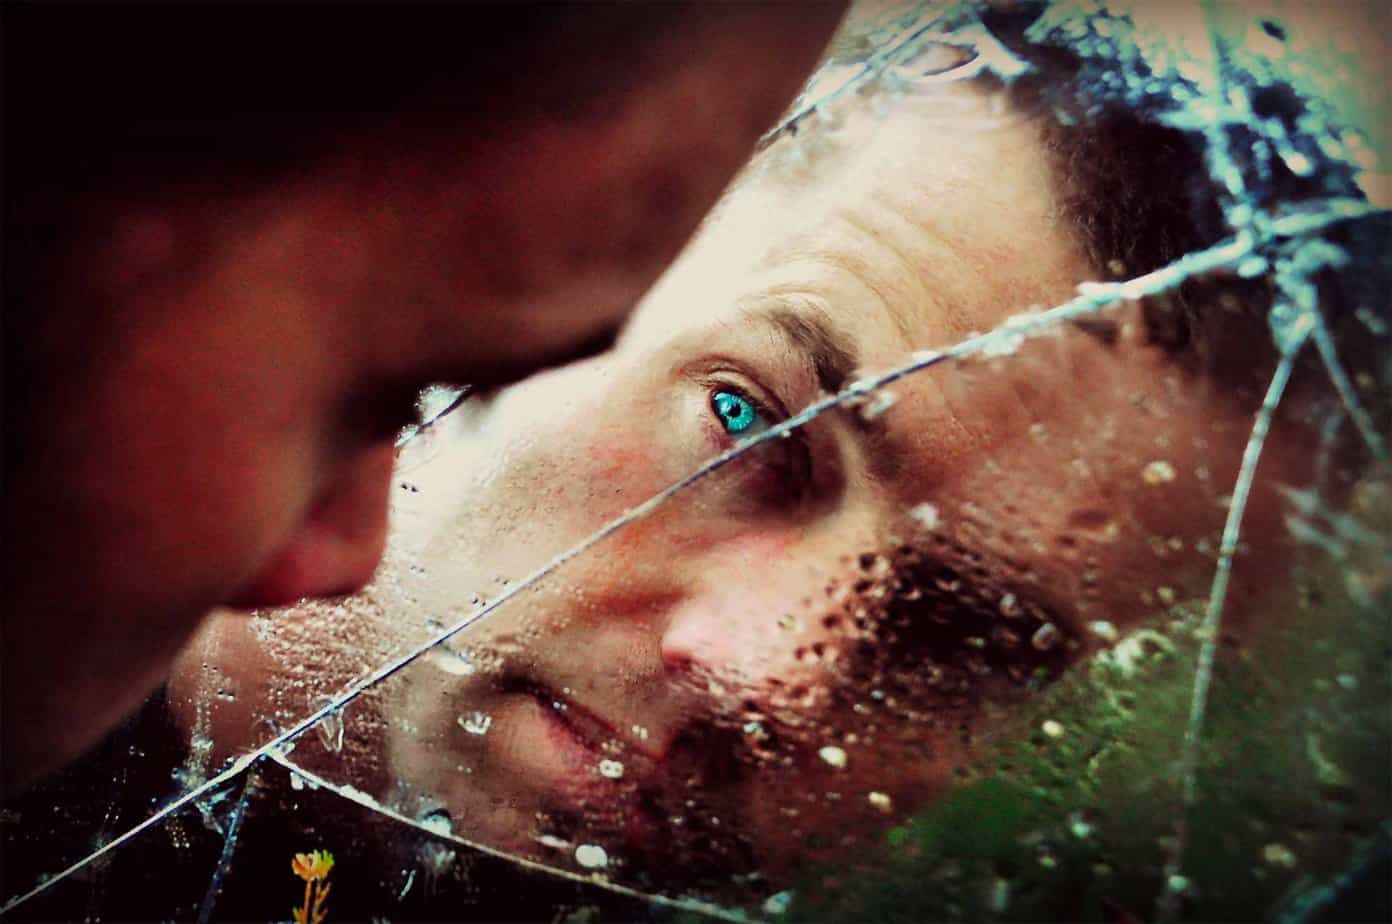 man with blue eyes staring into reflection in a cracked and broken mirror